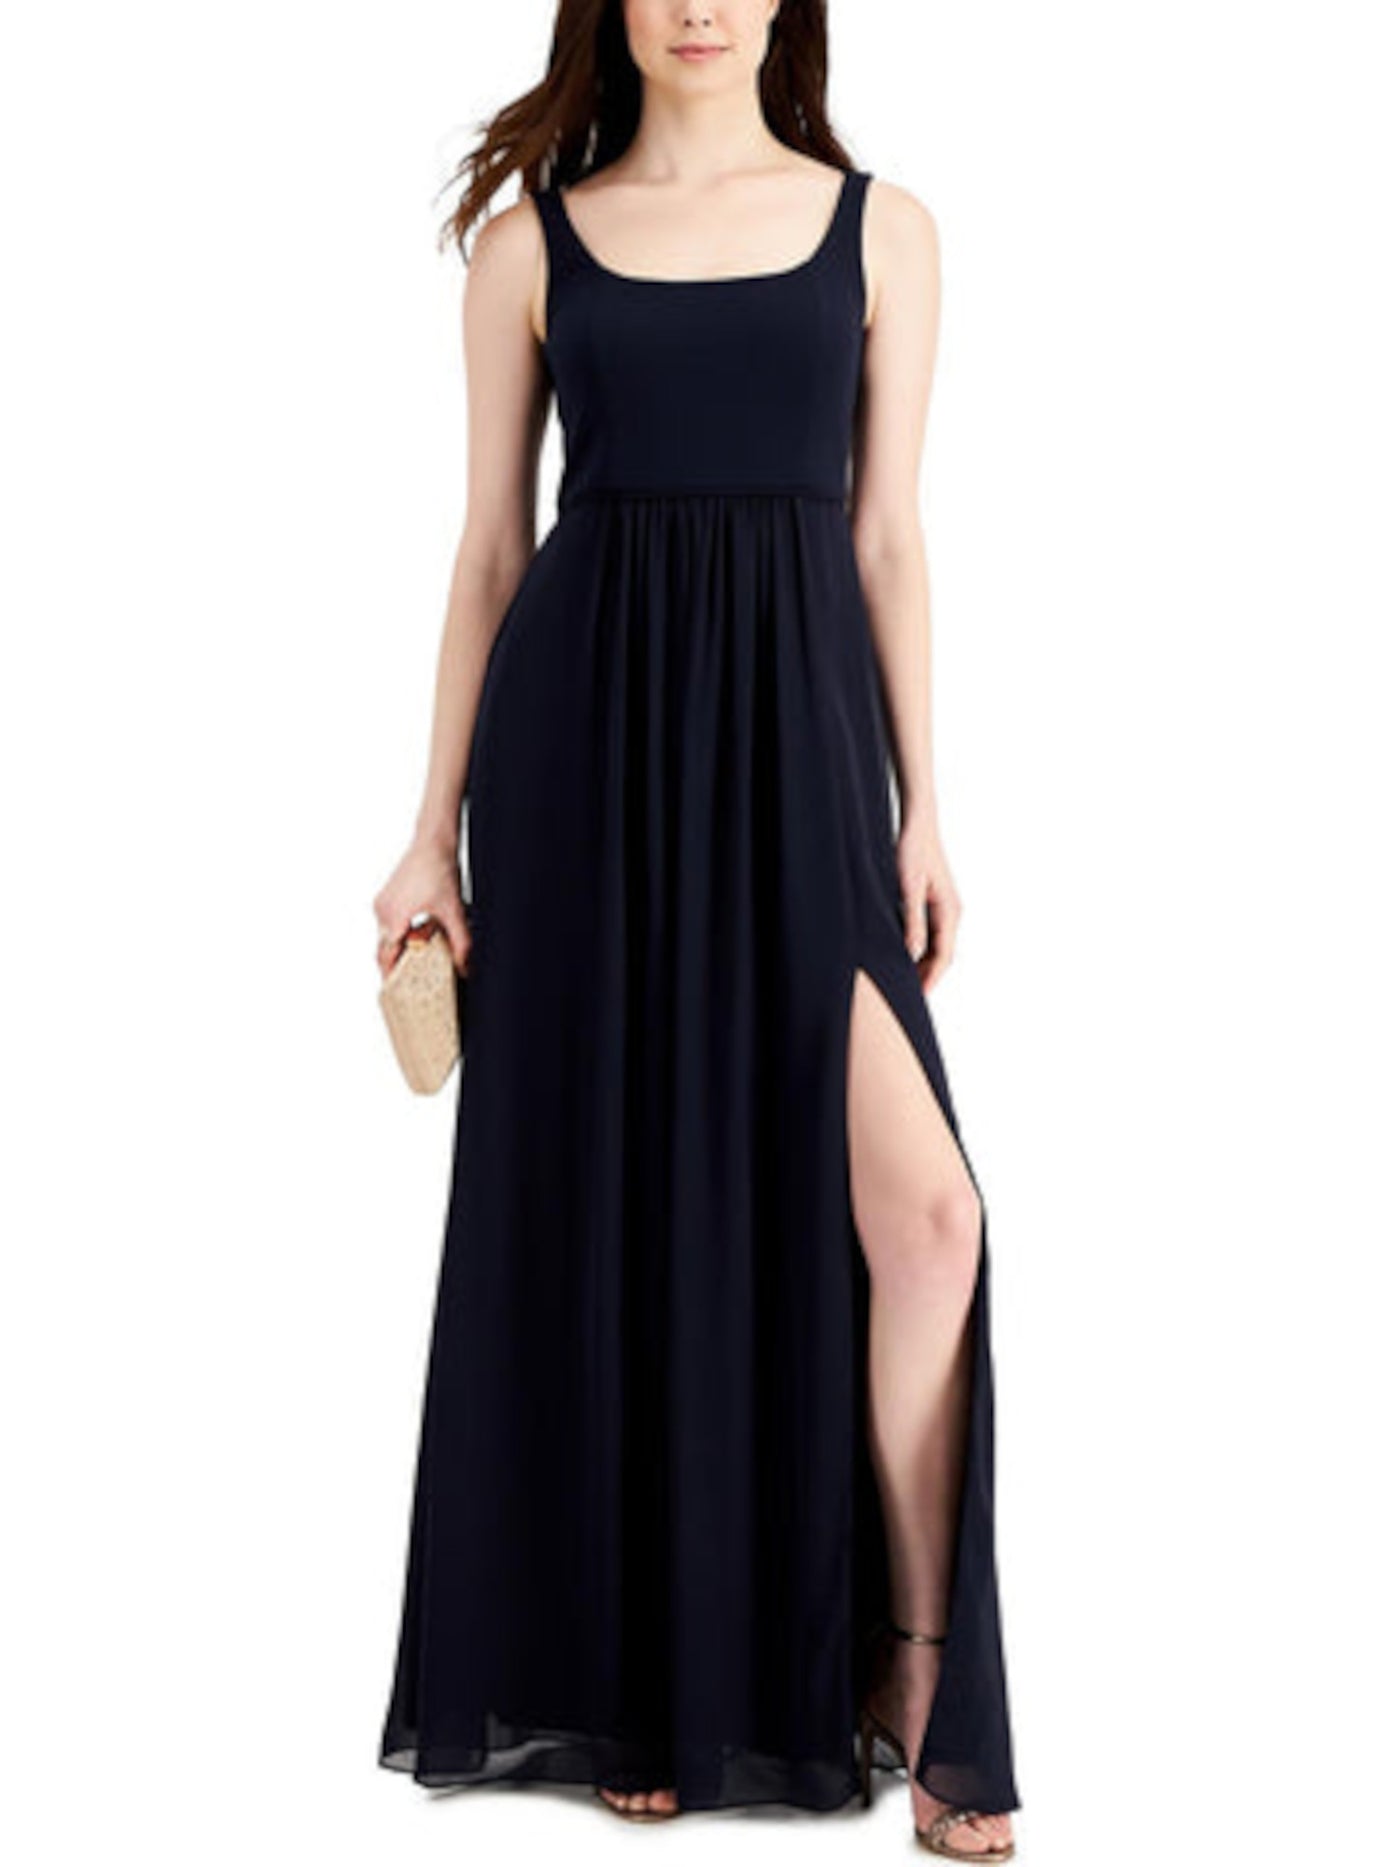 ADRIANNA PAPELL Womens Navy Zippered Slitted Gathered Pleated Lined Sheer Sleeveless Square Neck Full-Length Evening Gown Dress 8